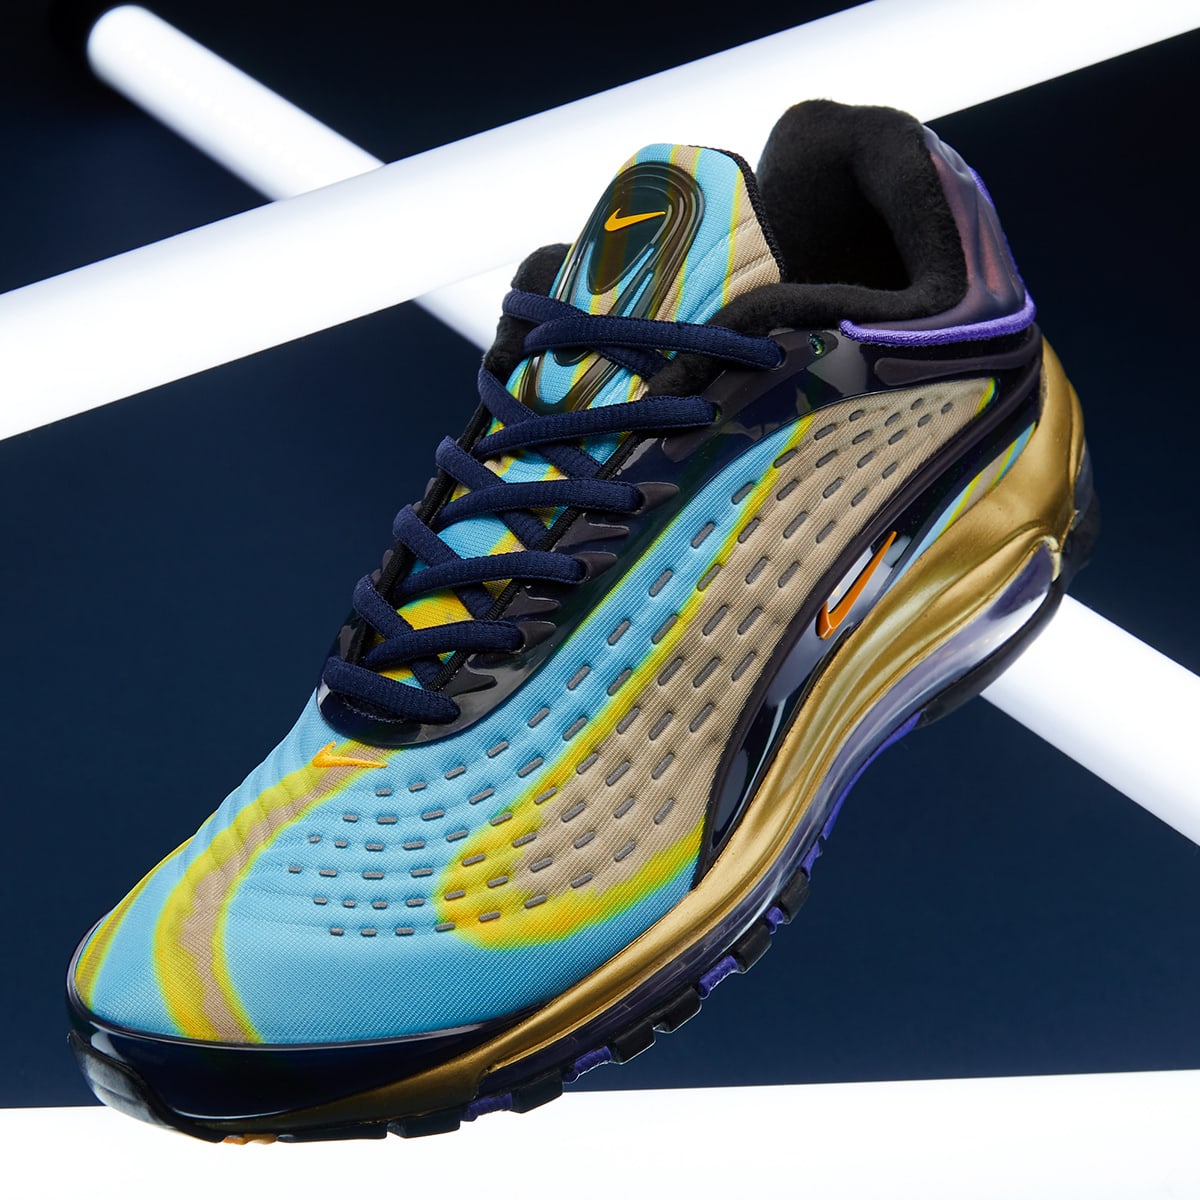 Nike Air Max Deluxe (Navy, Orange, Violet & Black) | END. Launches